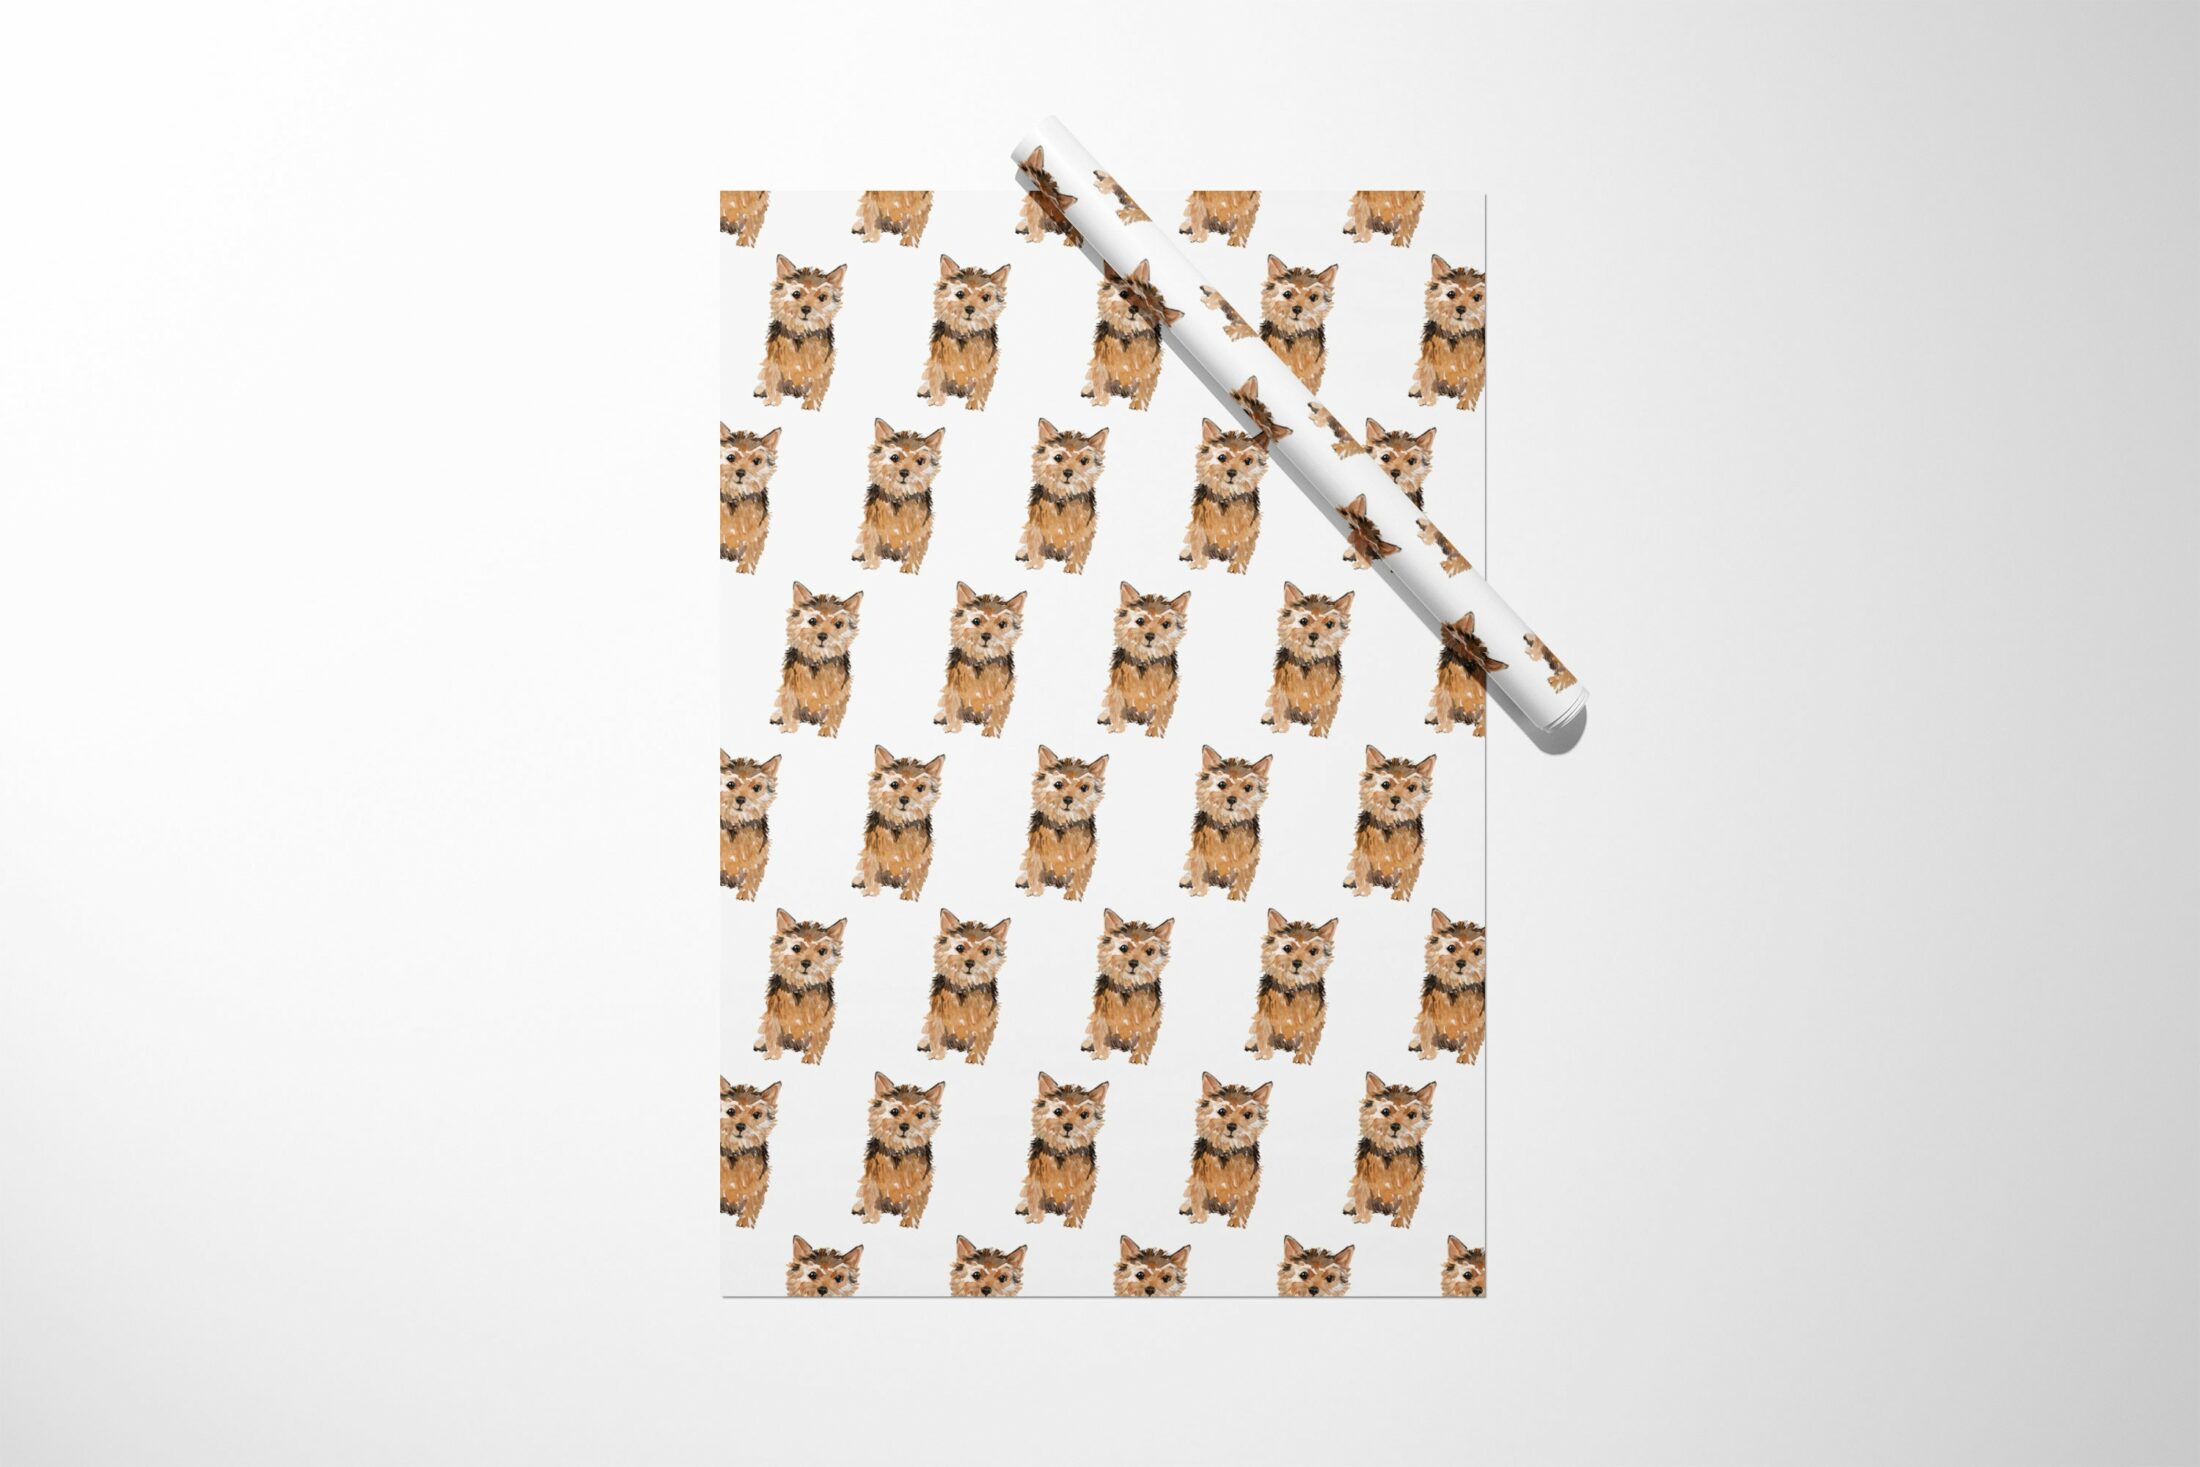 Christmas wrapping paper with a Norfolk Terrier on it. Norfolk Terrier Wrapping Paper || Christmas Wrapping Paper Birthday Bridal Baby Shower Wedding Gift Unique For Her Him Girl Boy 03-016-610